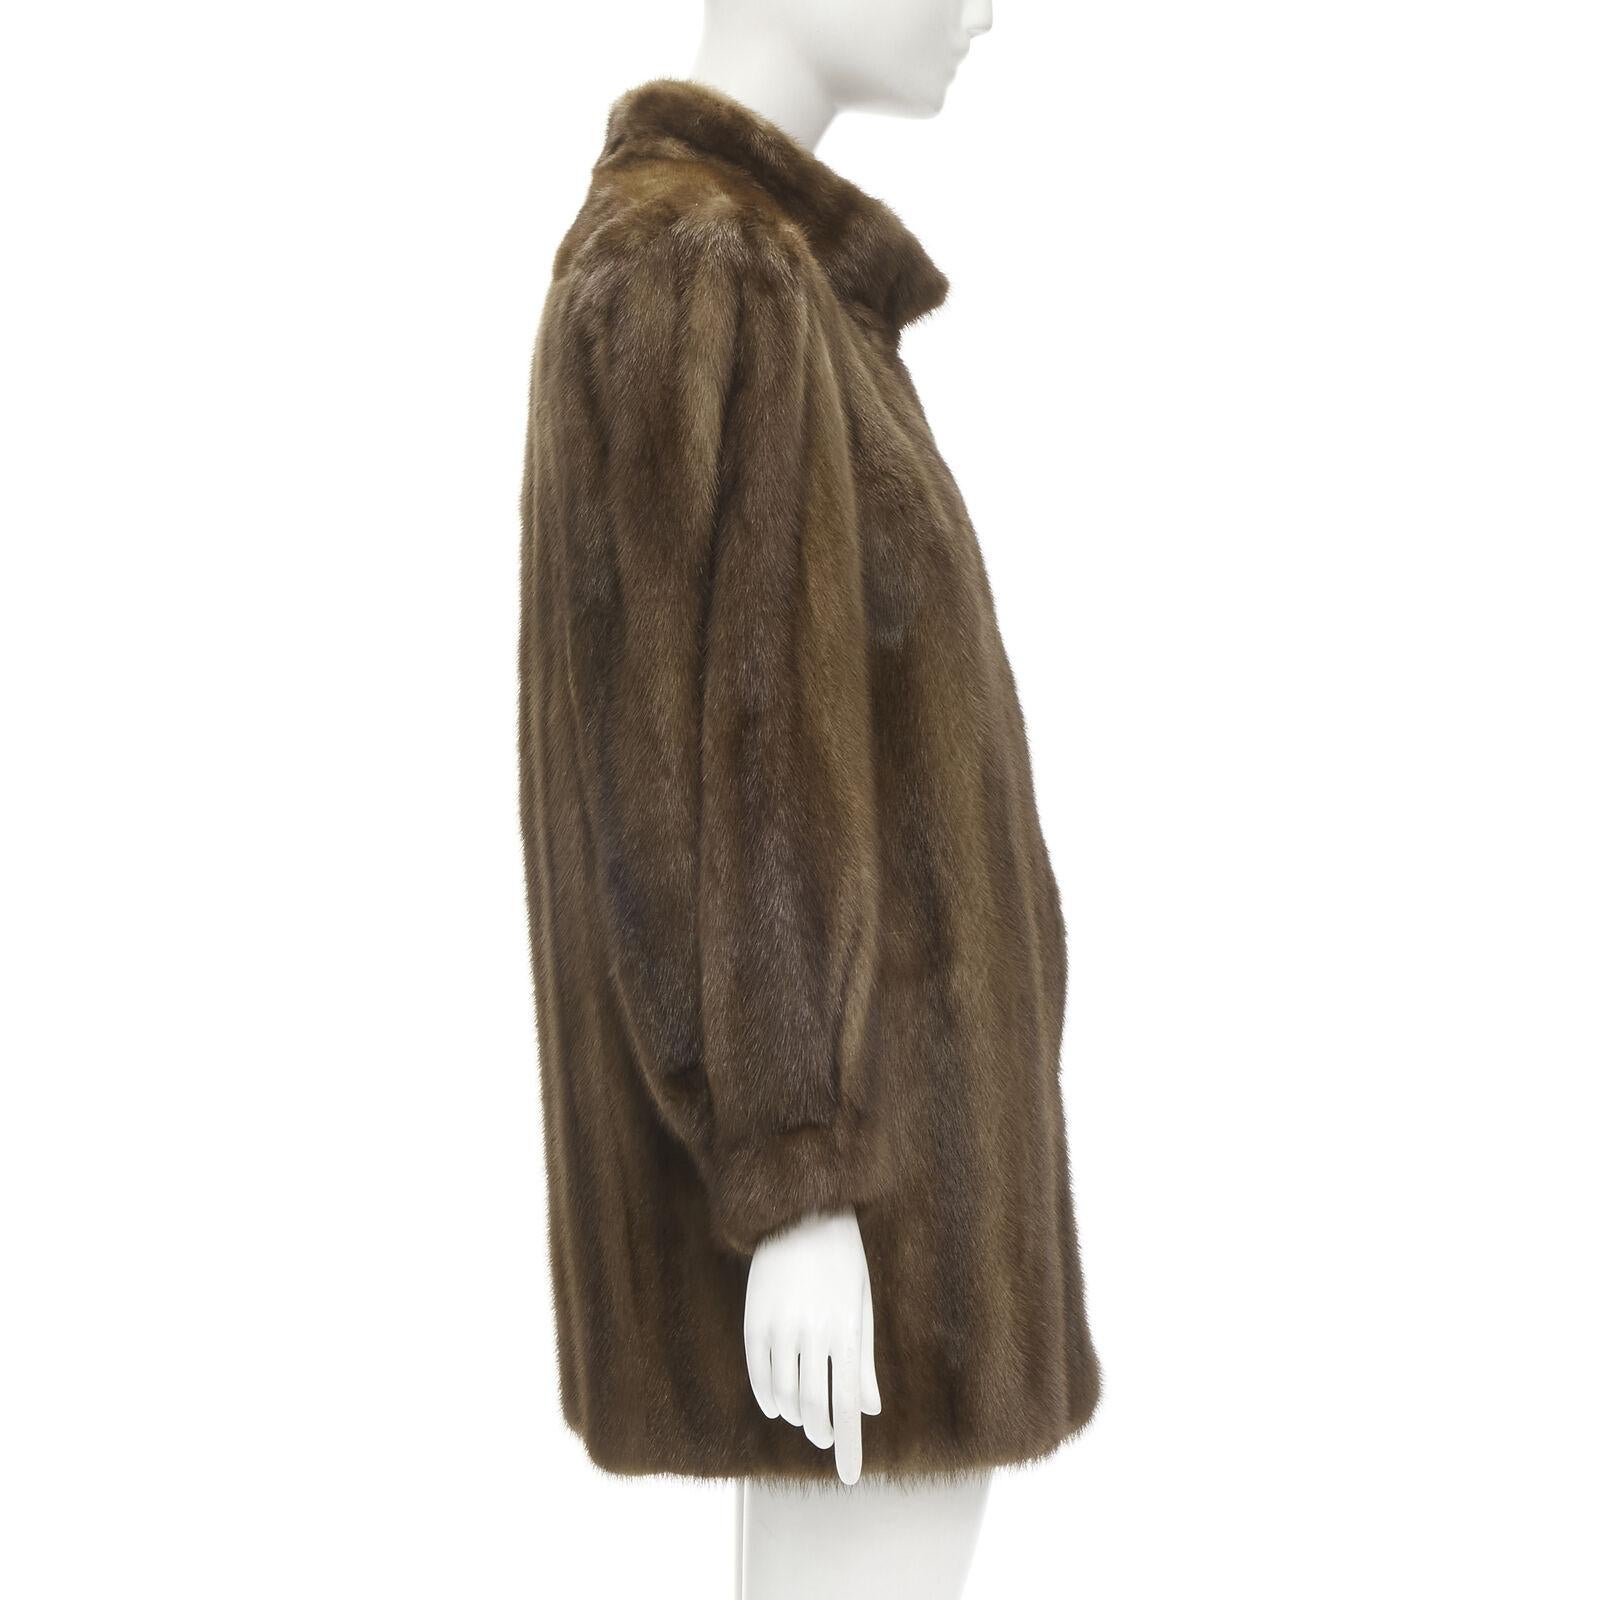 M JACQUES brown fur long sleeve collar jacket coat For Sale 1